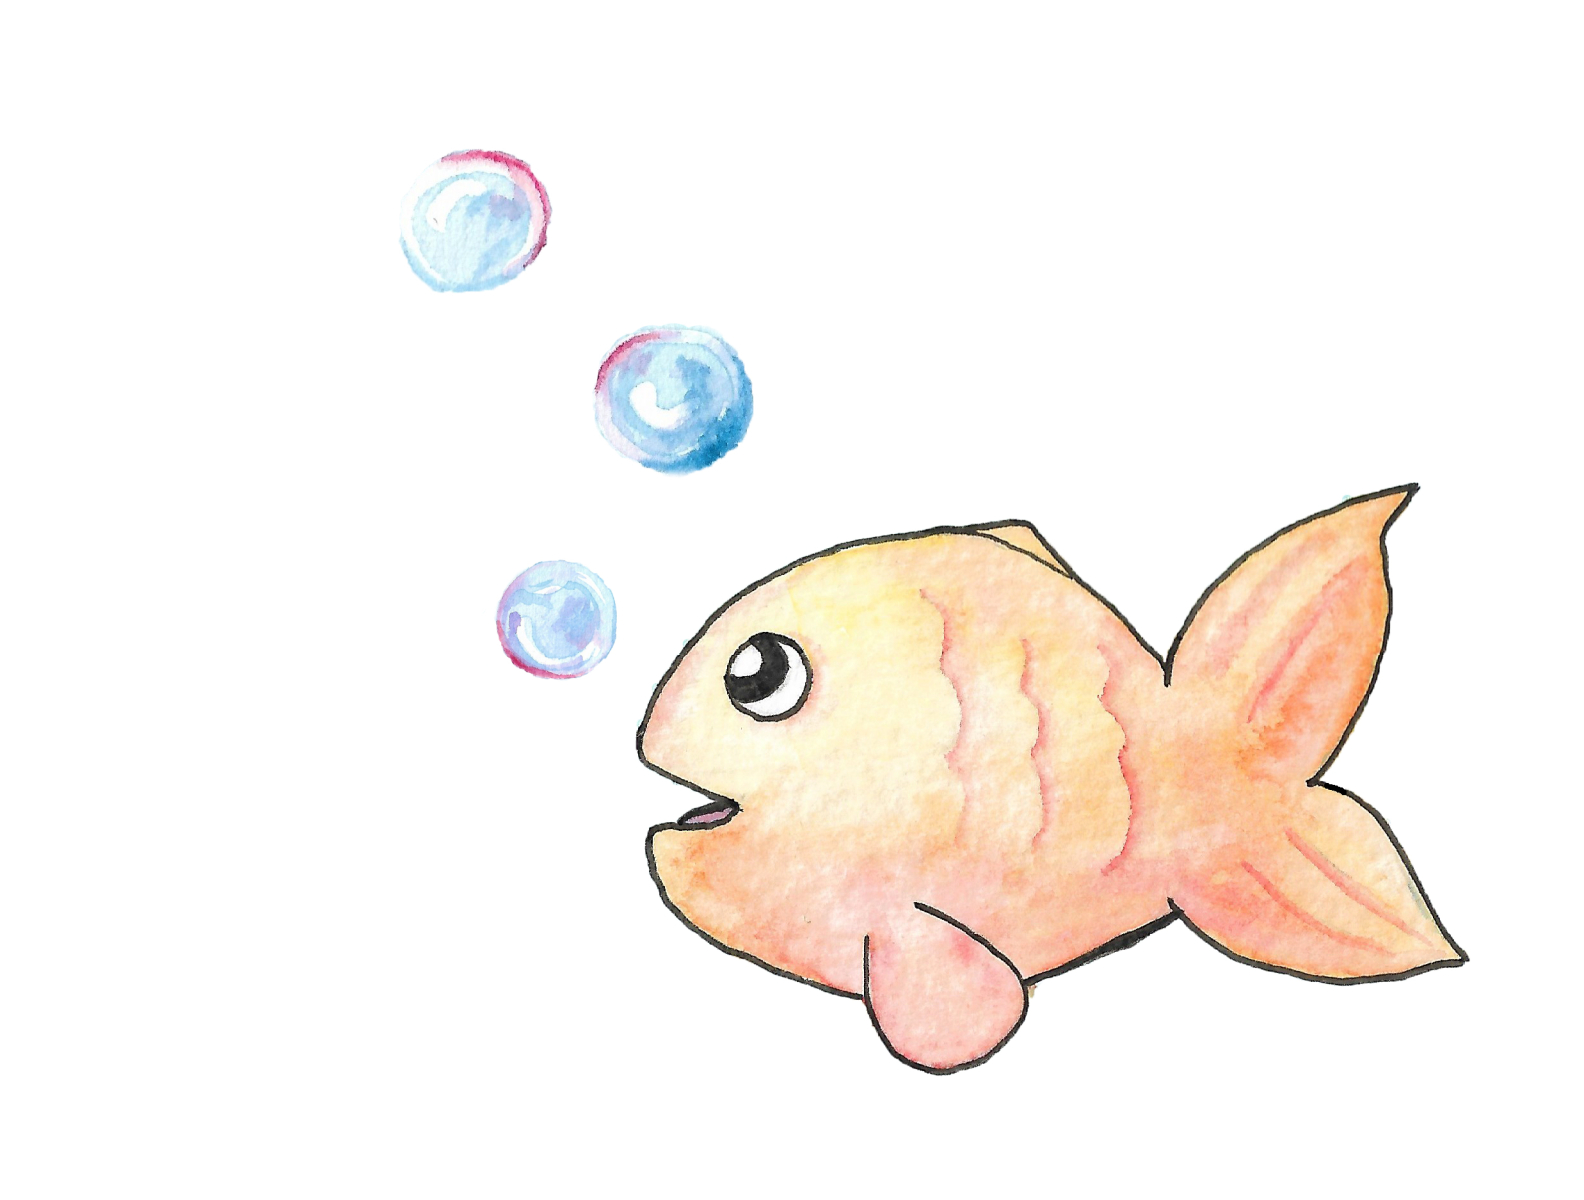 Fish Blowing Bubbles by Jade on Dribbble